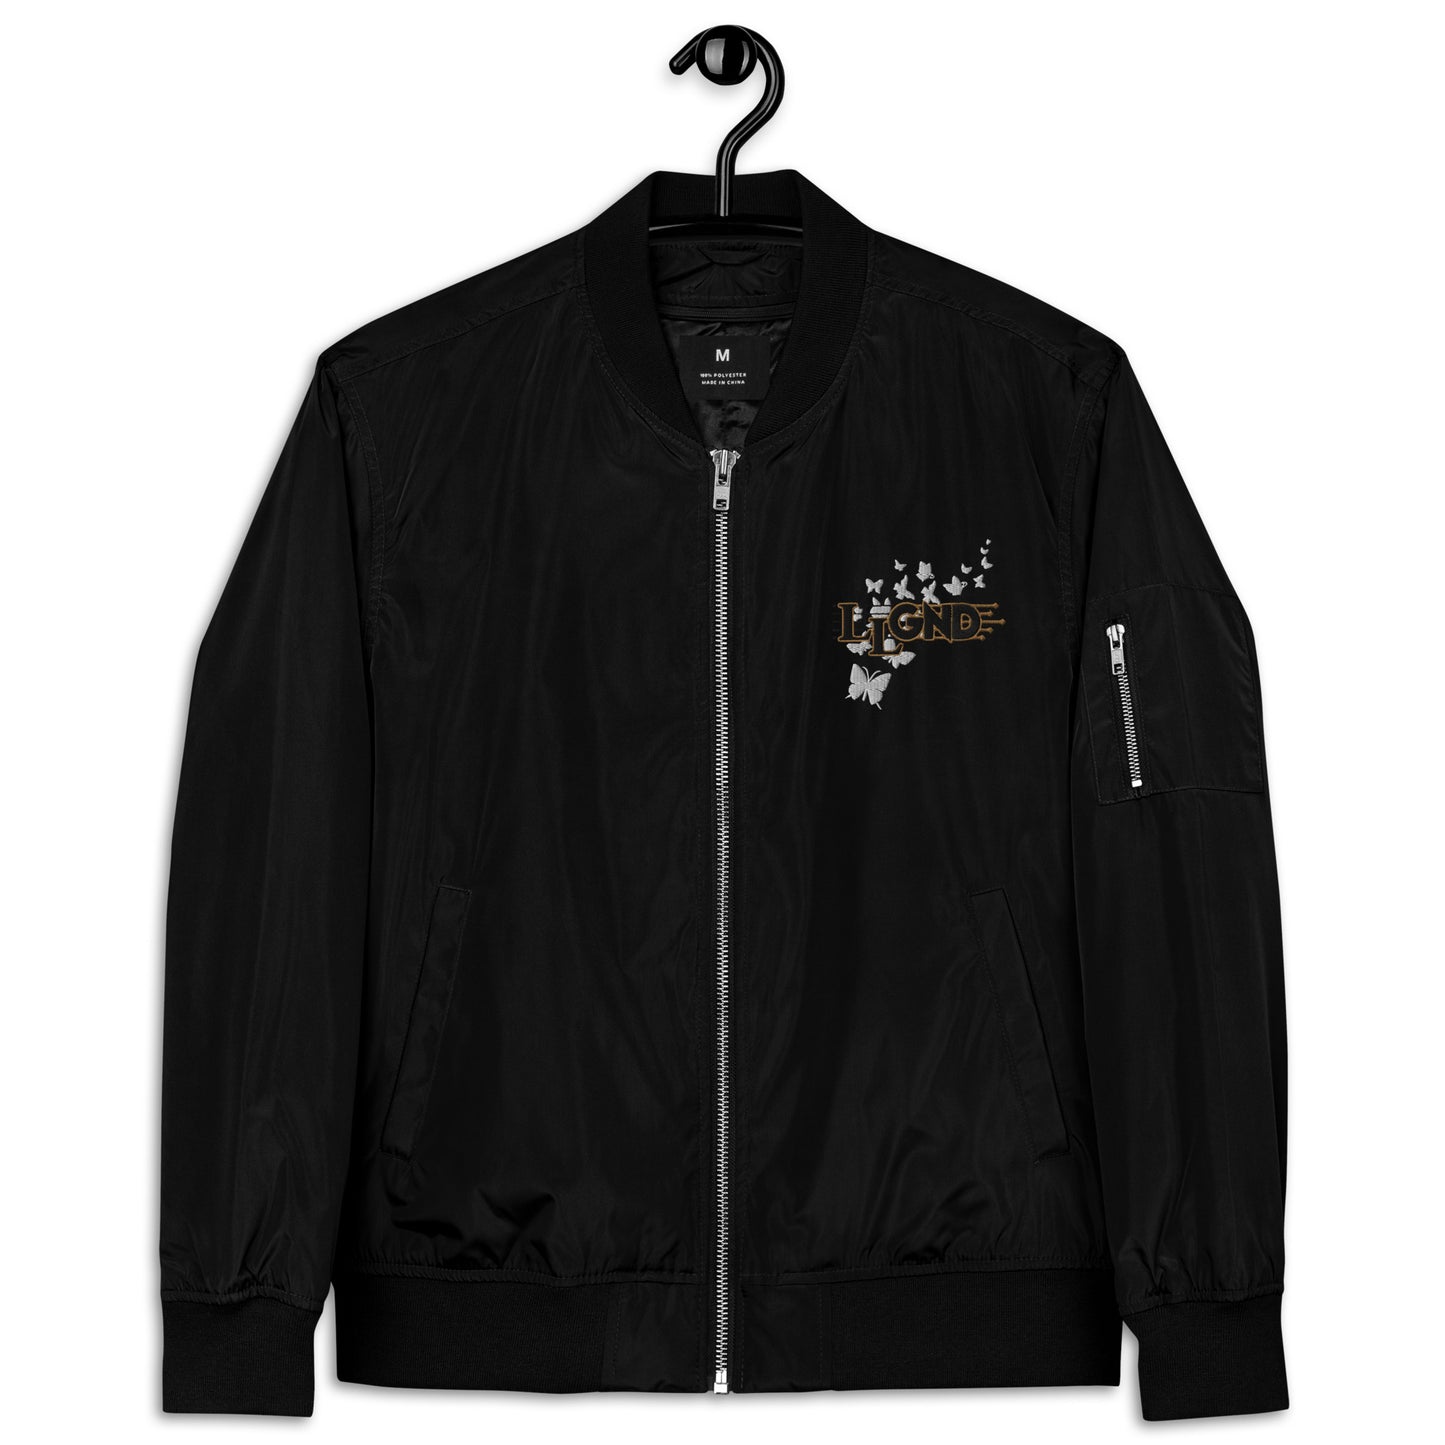 INSPIRE 100% RECYCLED BOMBER